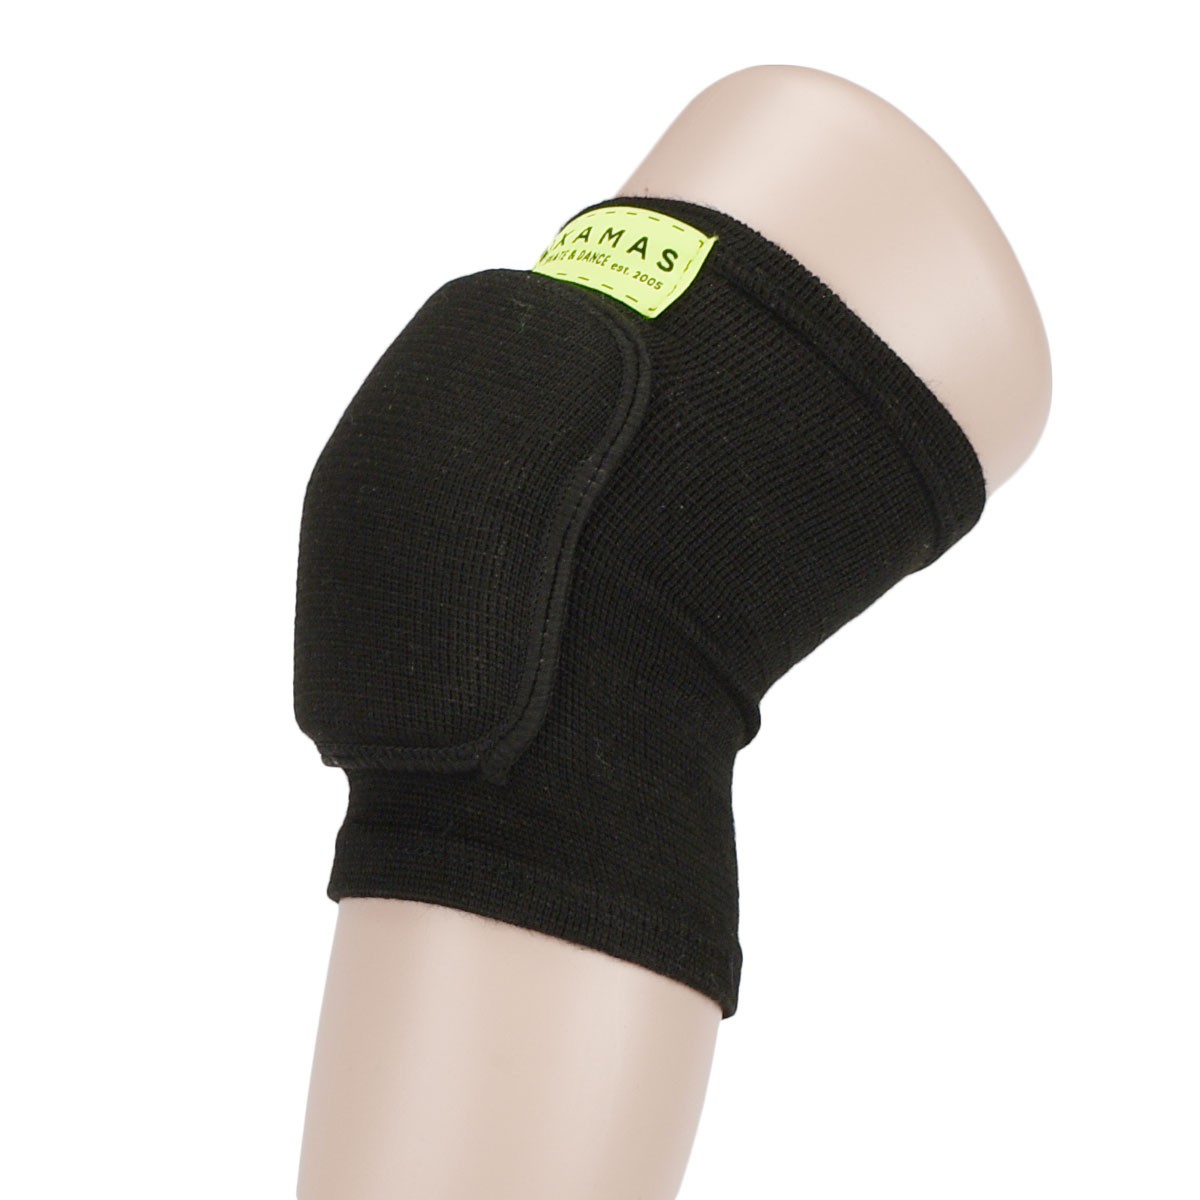 knee protection pads